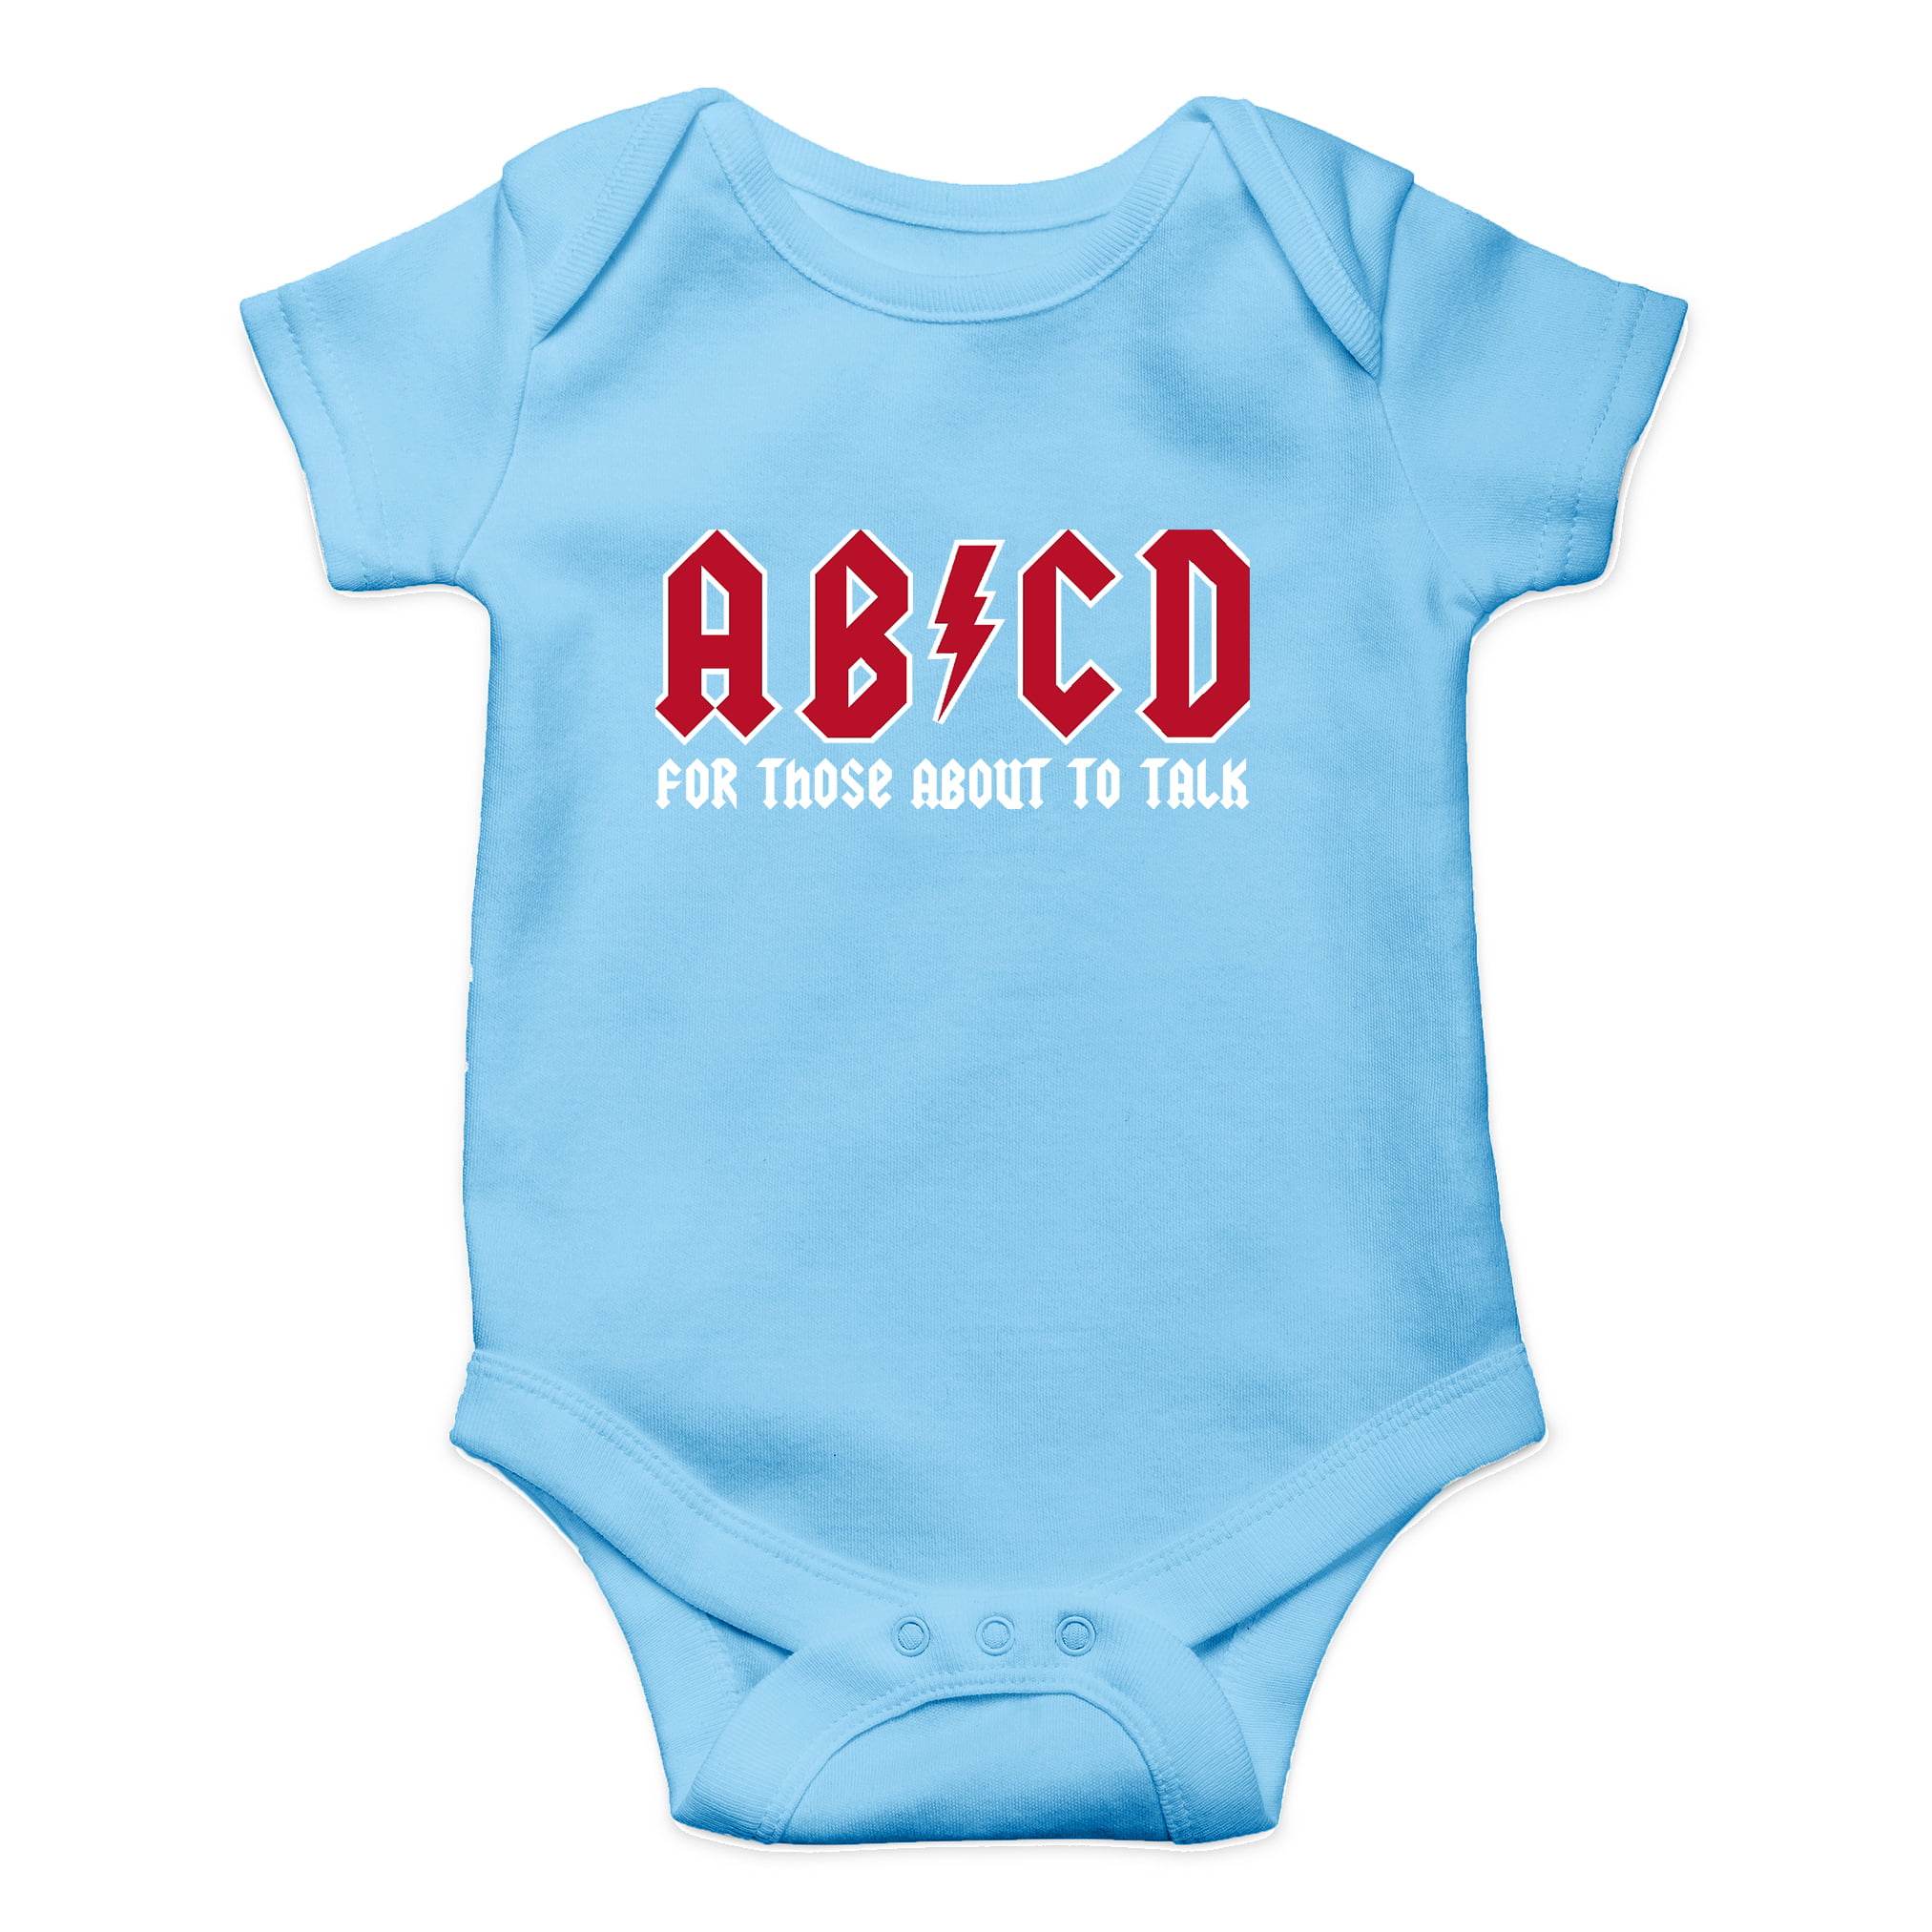 Hashtag Boss Funny Shirt Cute Newborn Baby Clothes Gift Idea Infant Baby Romper 